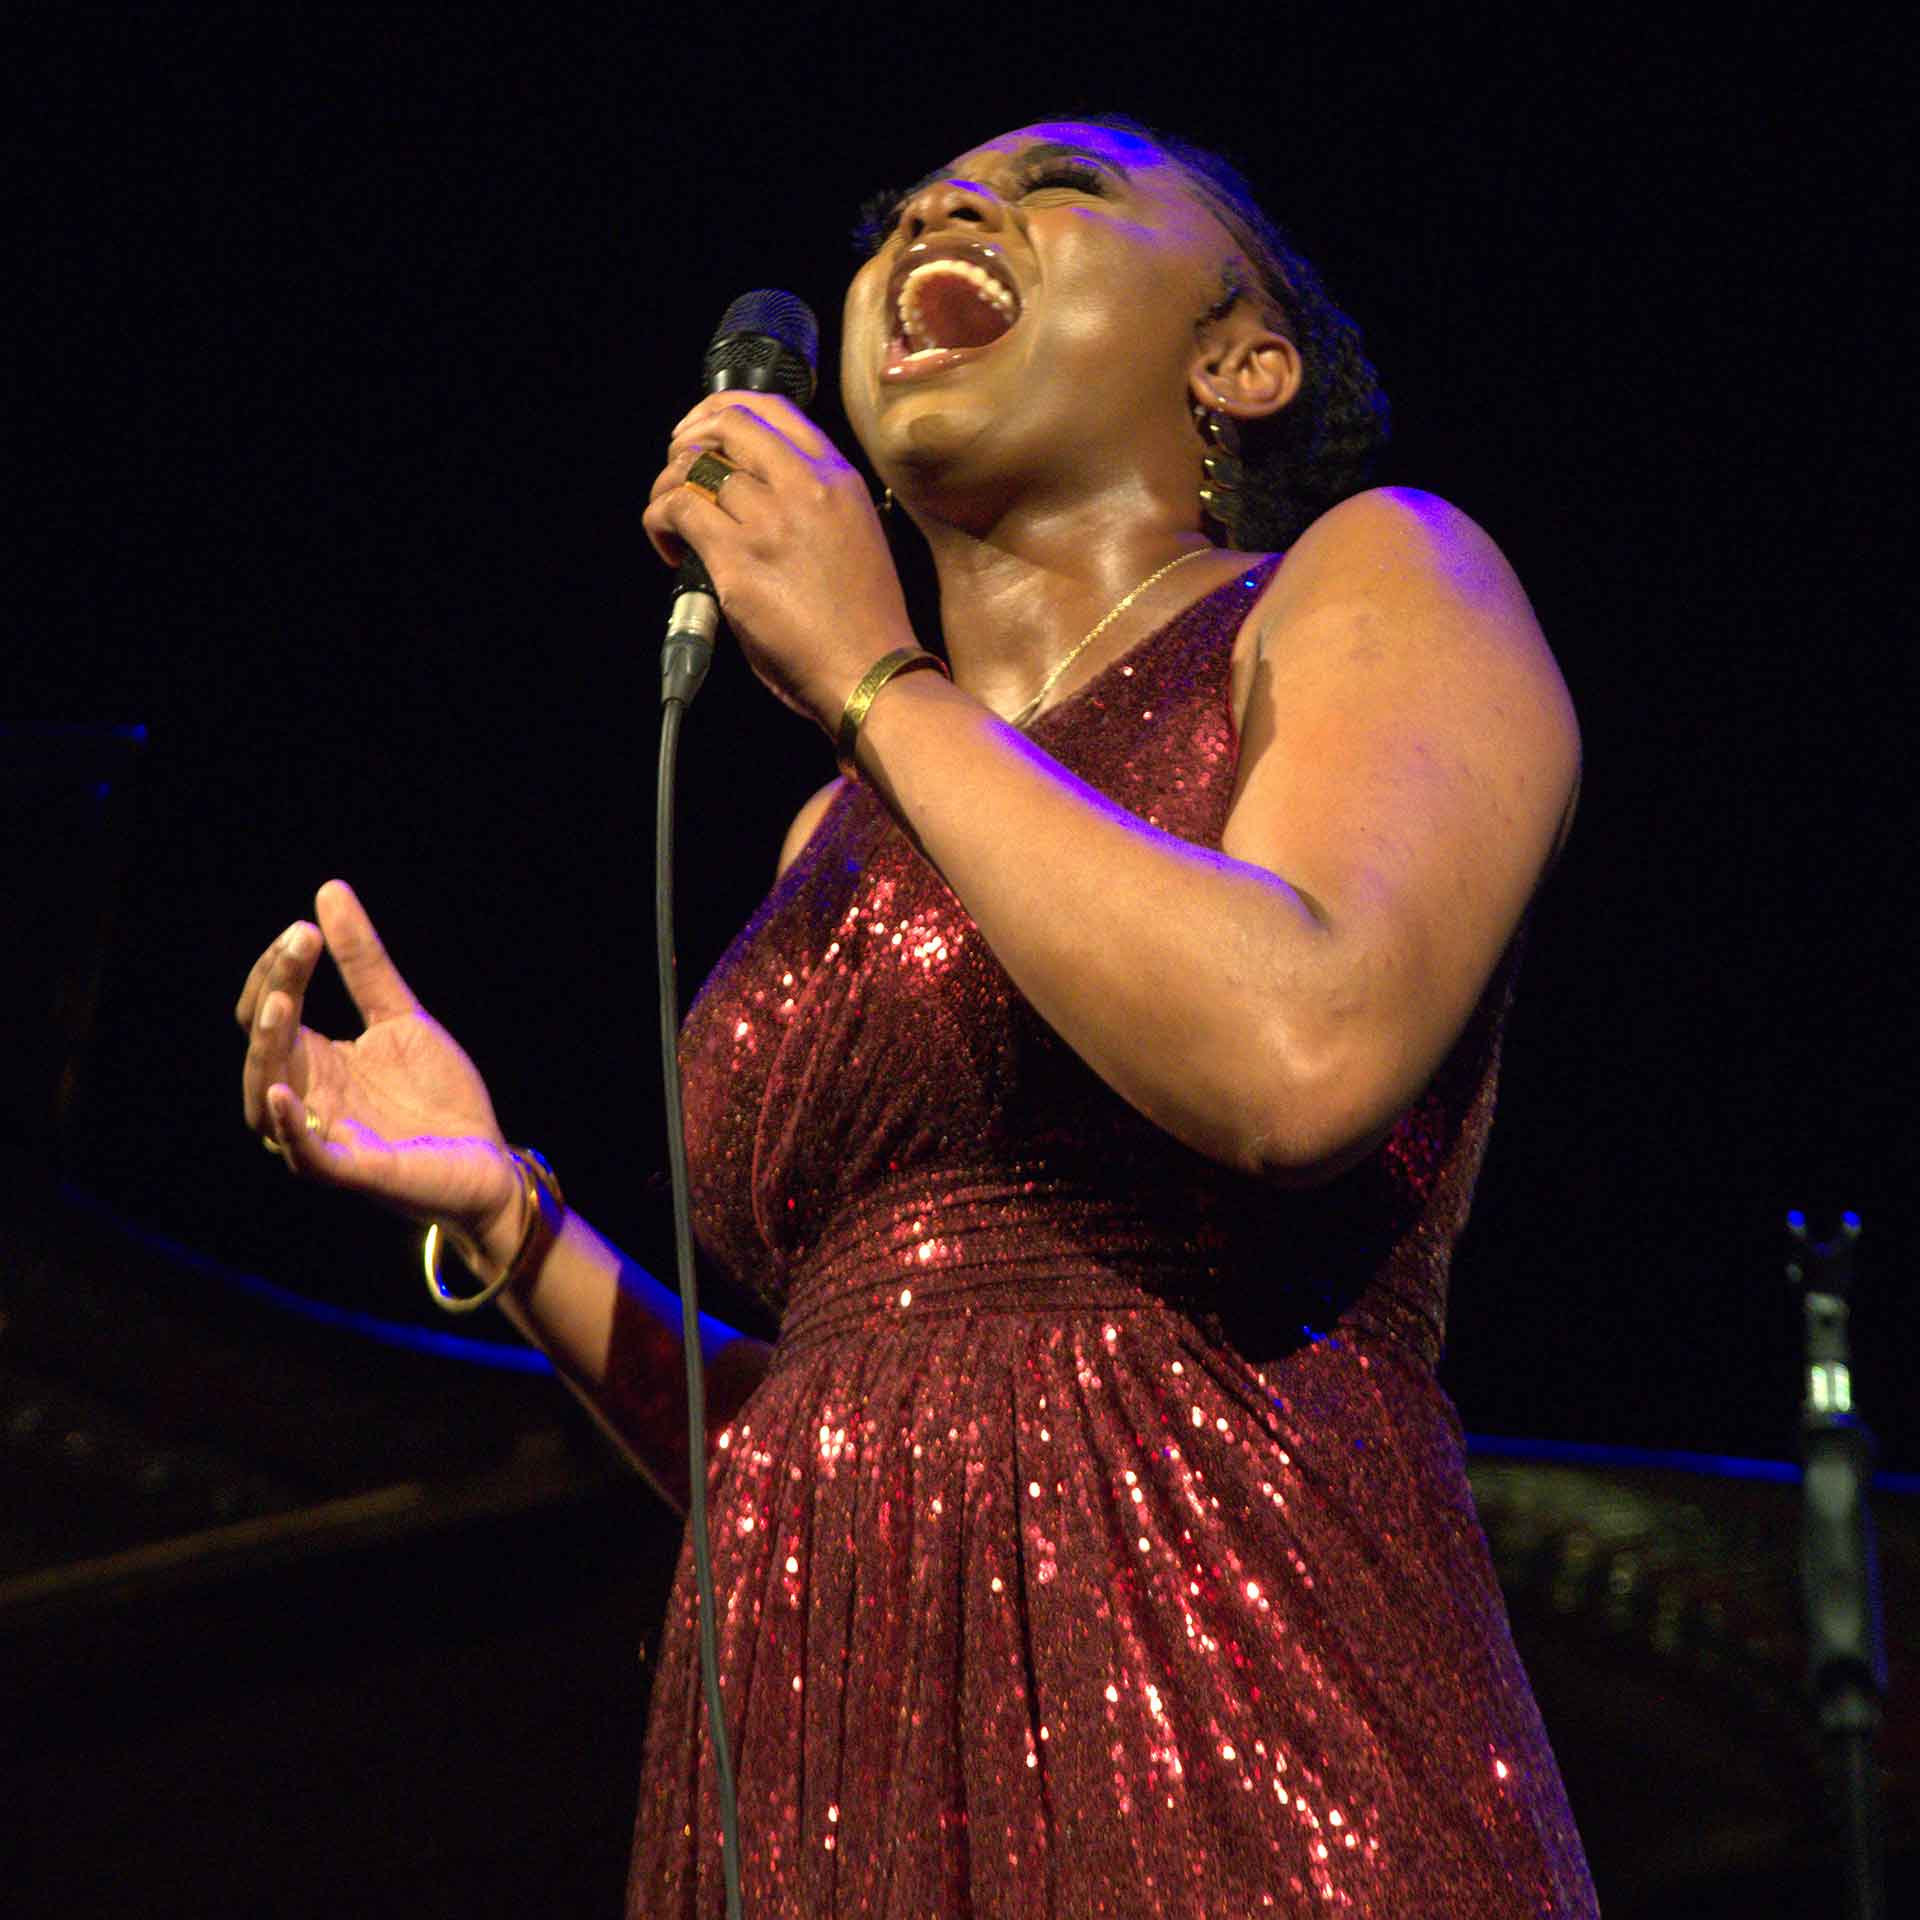 A black woman in a red dress sings into a microphone while tilting her head upward, eyes closed